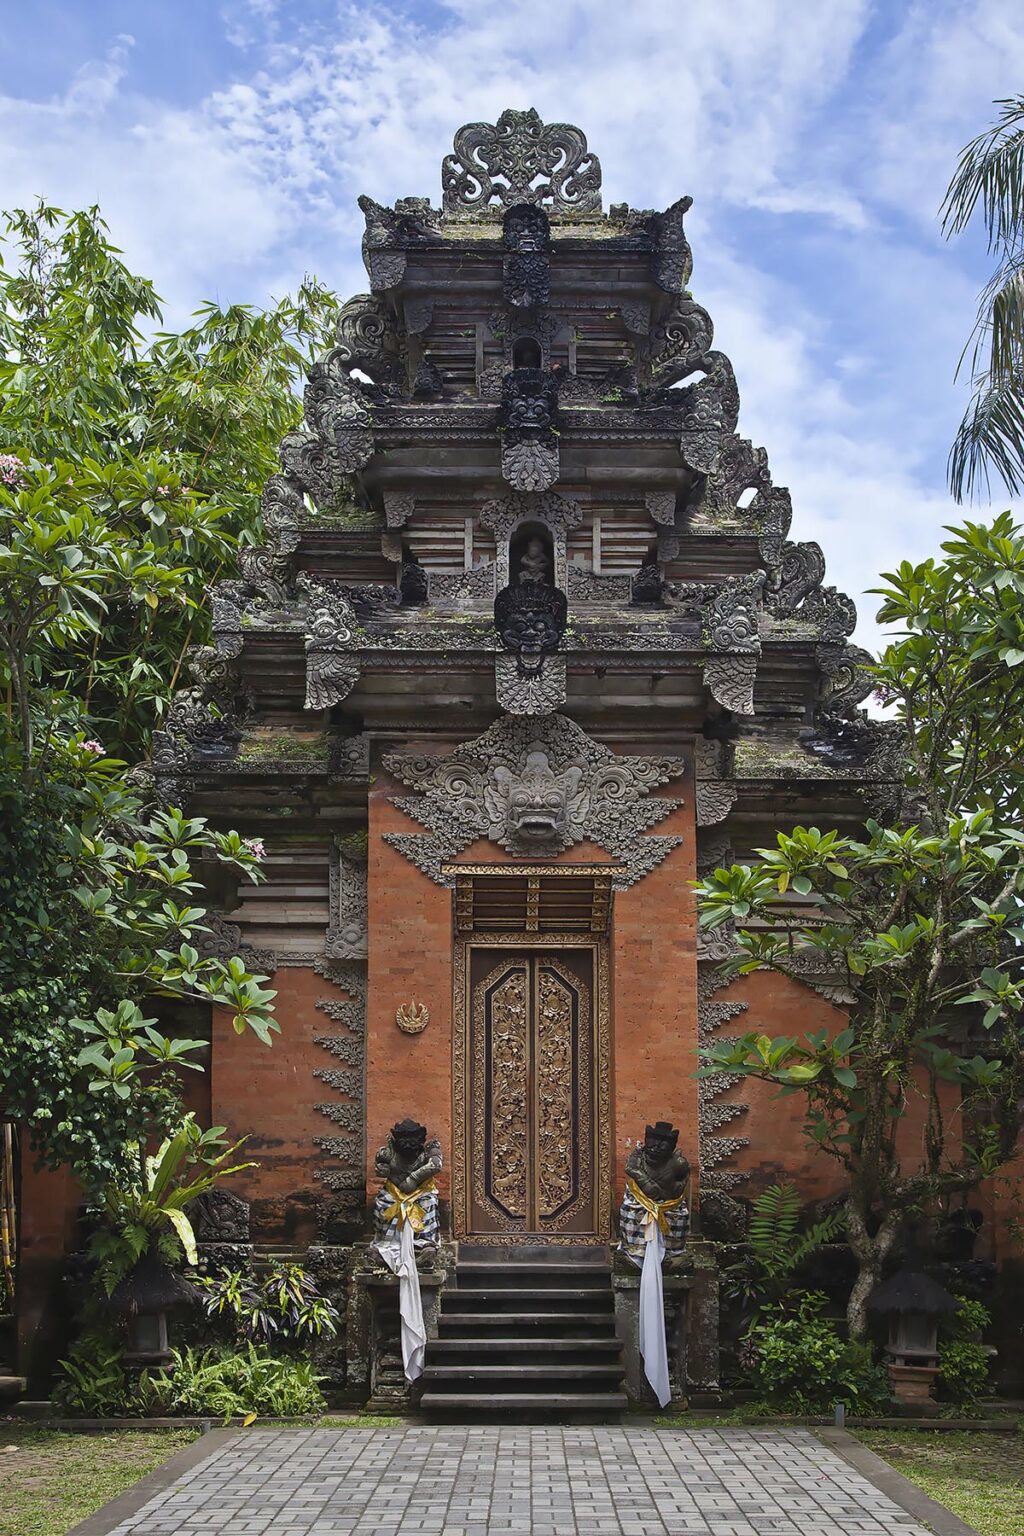 Ornate hand carved stone gate with Barong face of PURA DESA UBUD, the main Hindu temple of the town  - UBUD, BALI